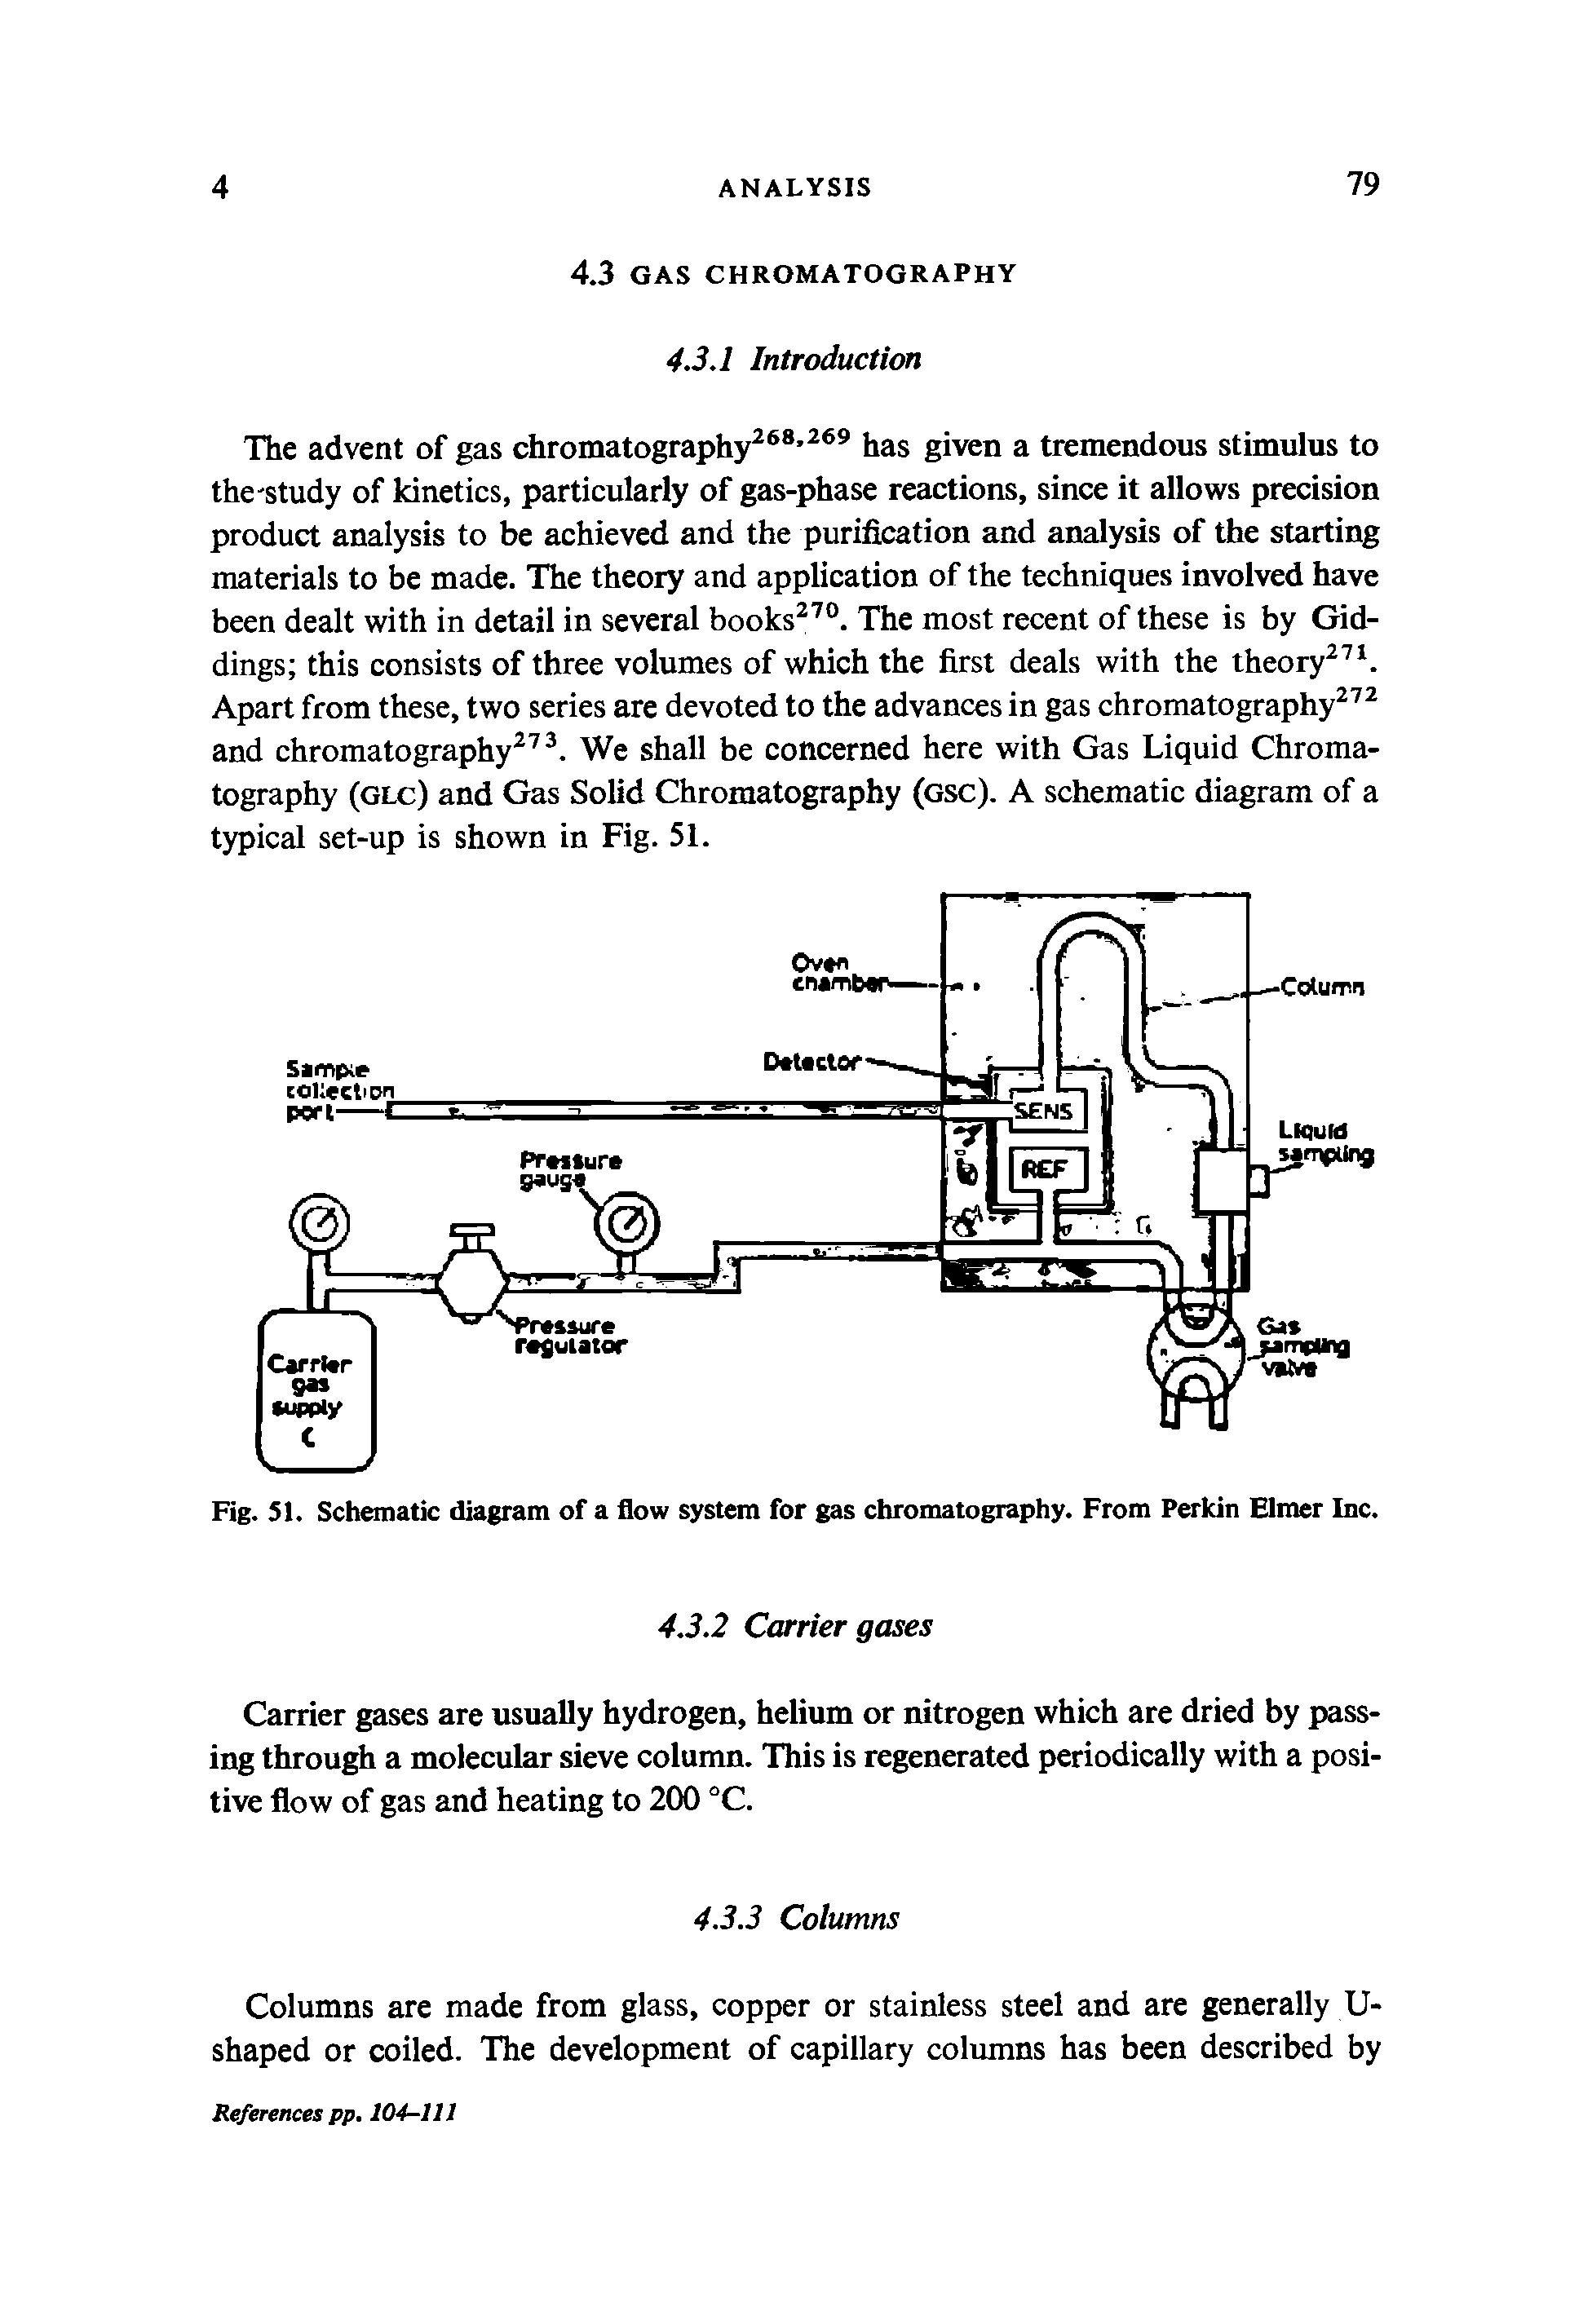 Fig. 51. Schematic diagram of a flow system for gas chromatography. From Perkin Elmer Inc.